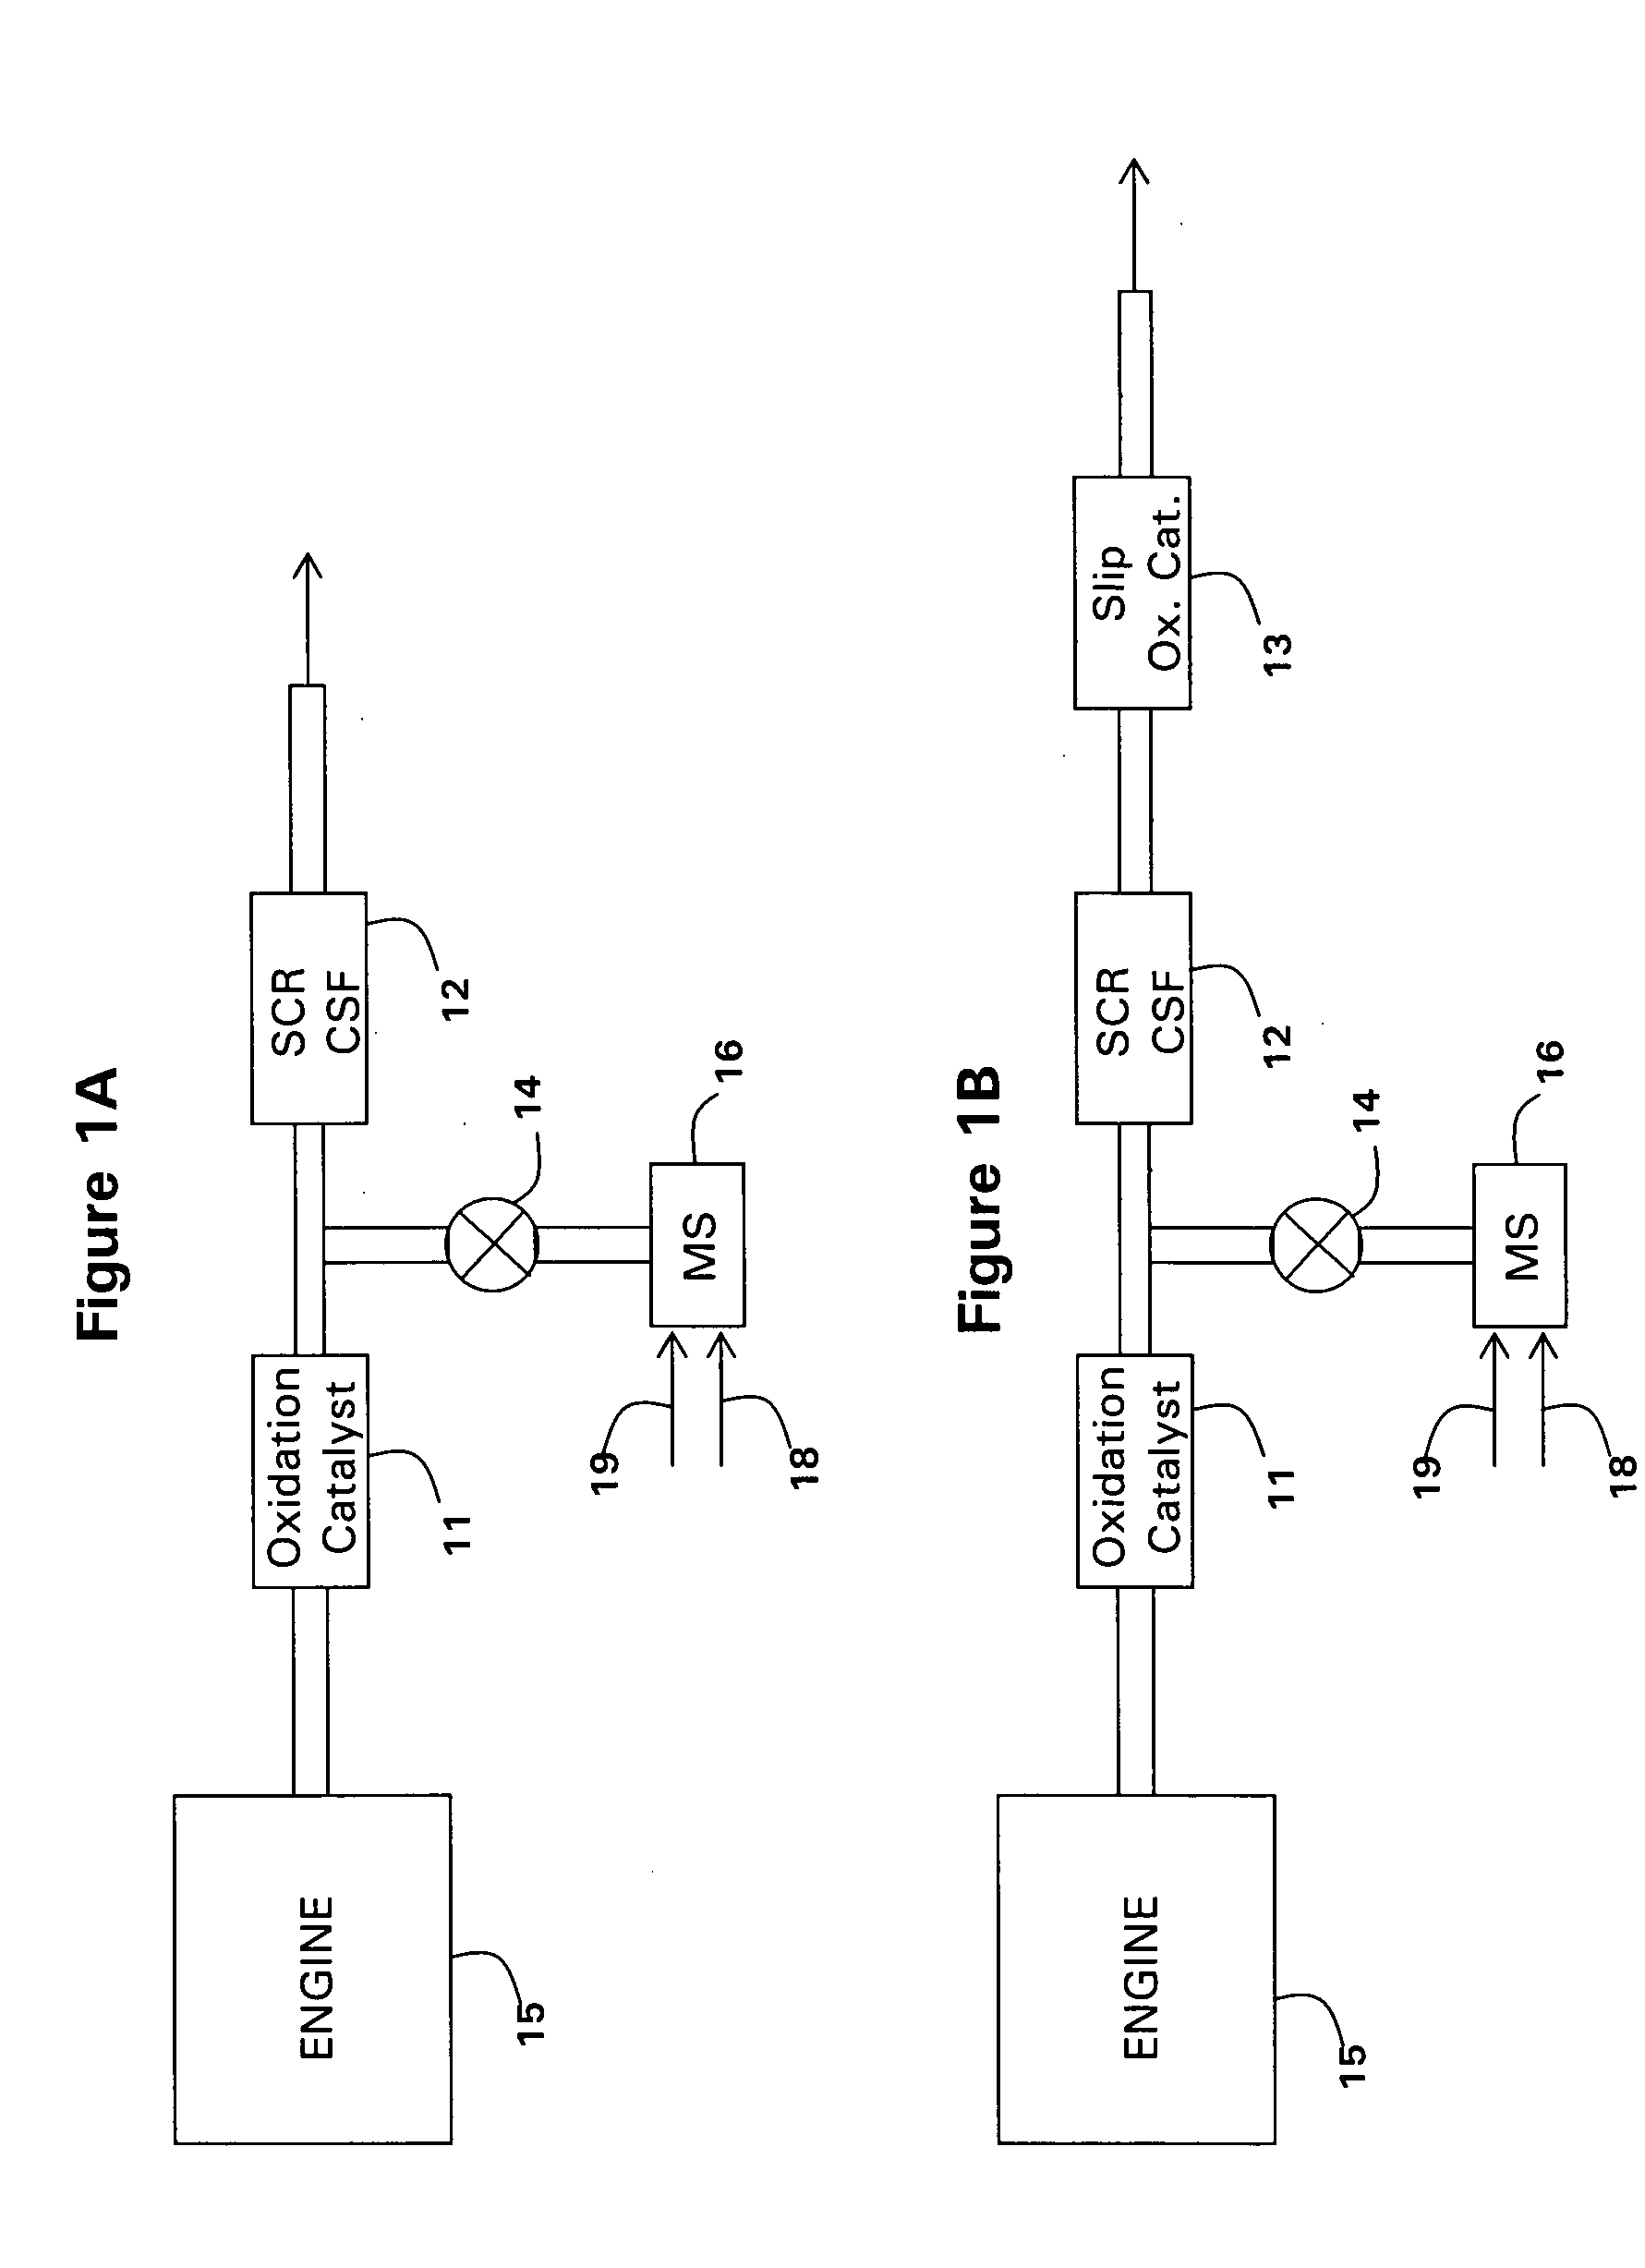 Catalyzed SCR filter and emission treatment system